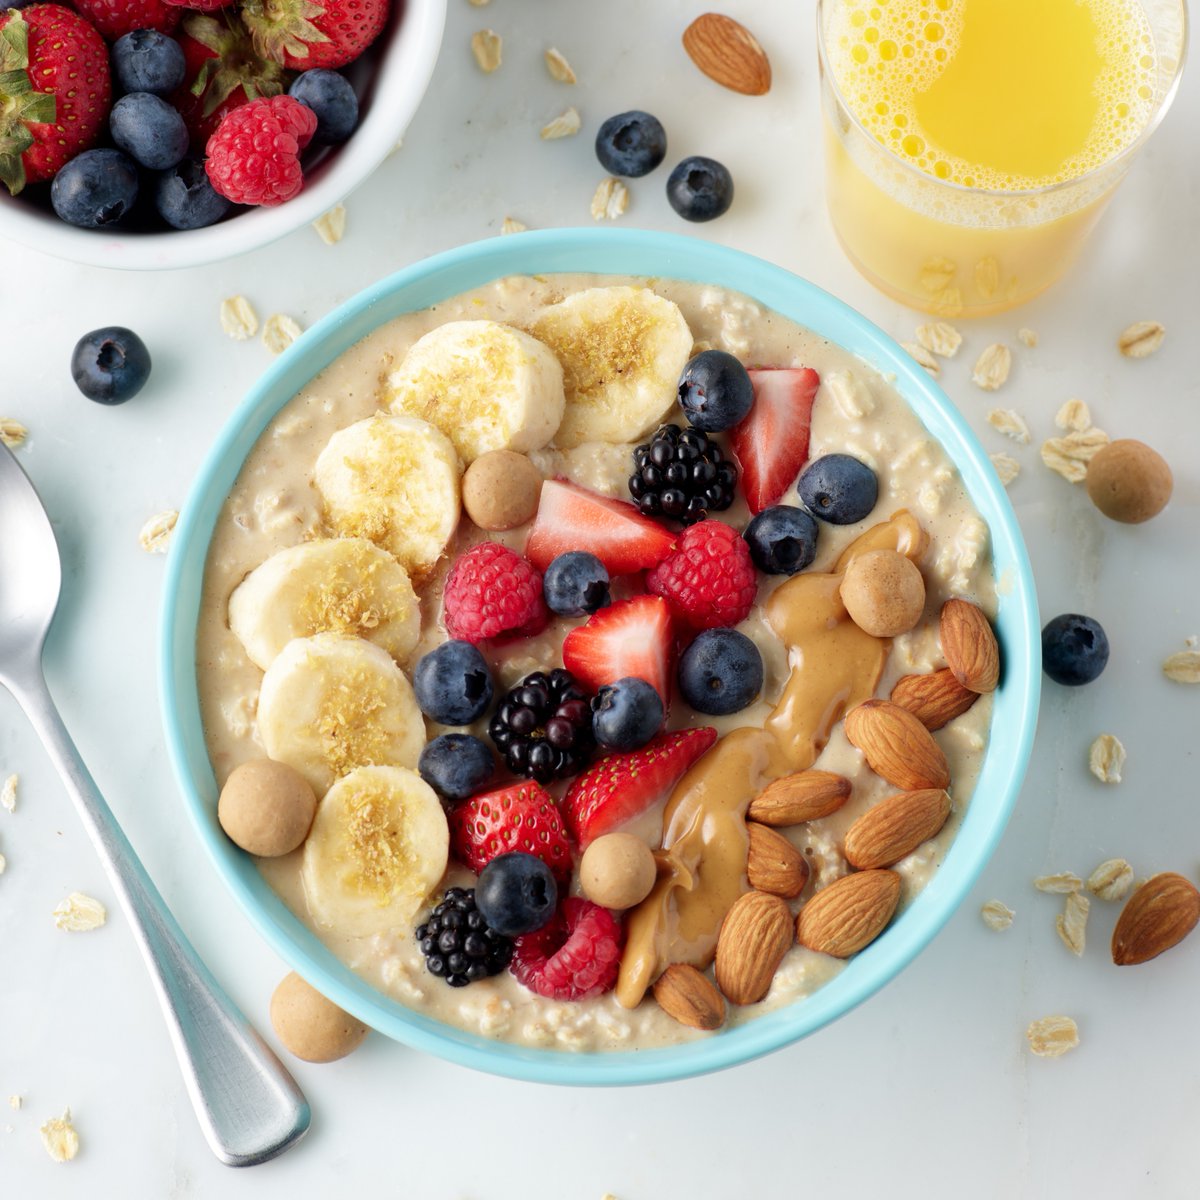 Rise and shine, peanut butter lovers! 🌄🥜 Say hello to a hassle-free breakfast with our overnight peanut butter oats. Just a few minutes of prep last night means a delicious and nutritious morning awaits you. bit.ly/48996BZ